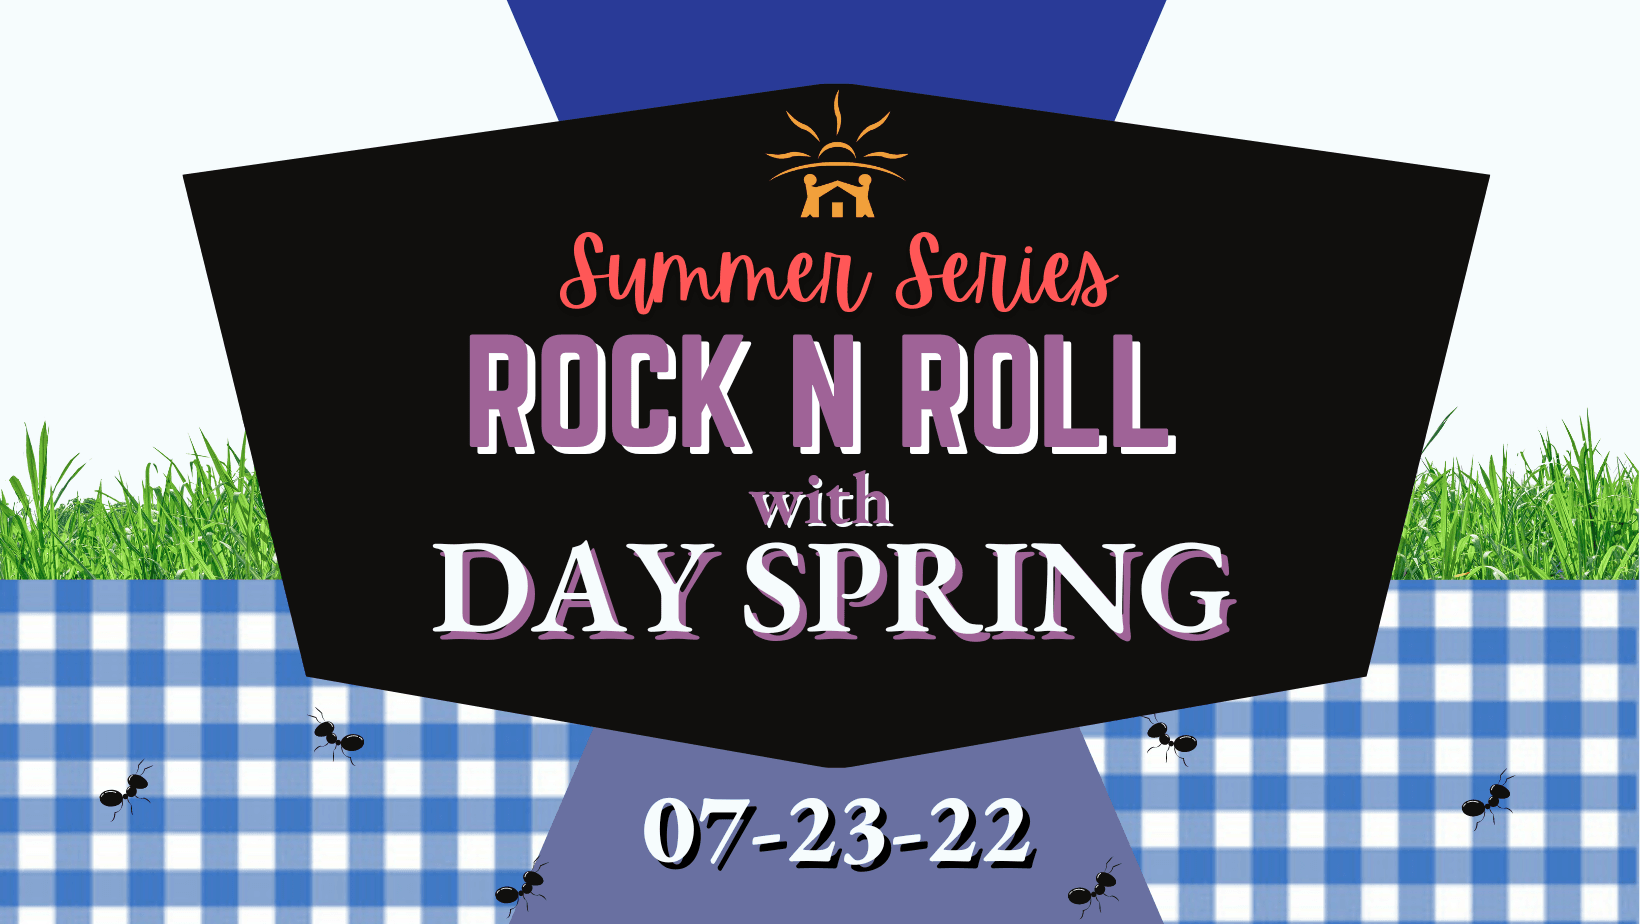 Rock N' Roll with Day Spring